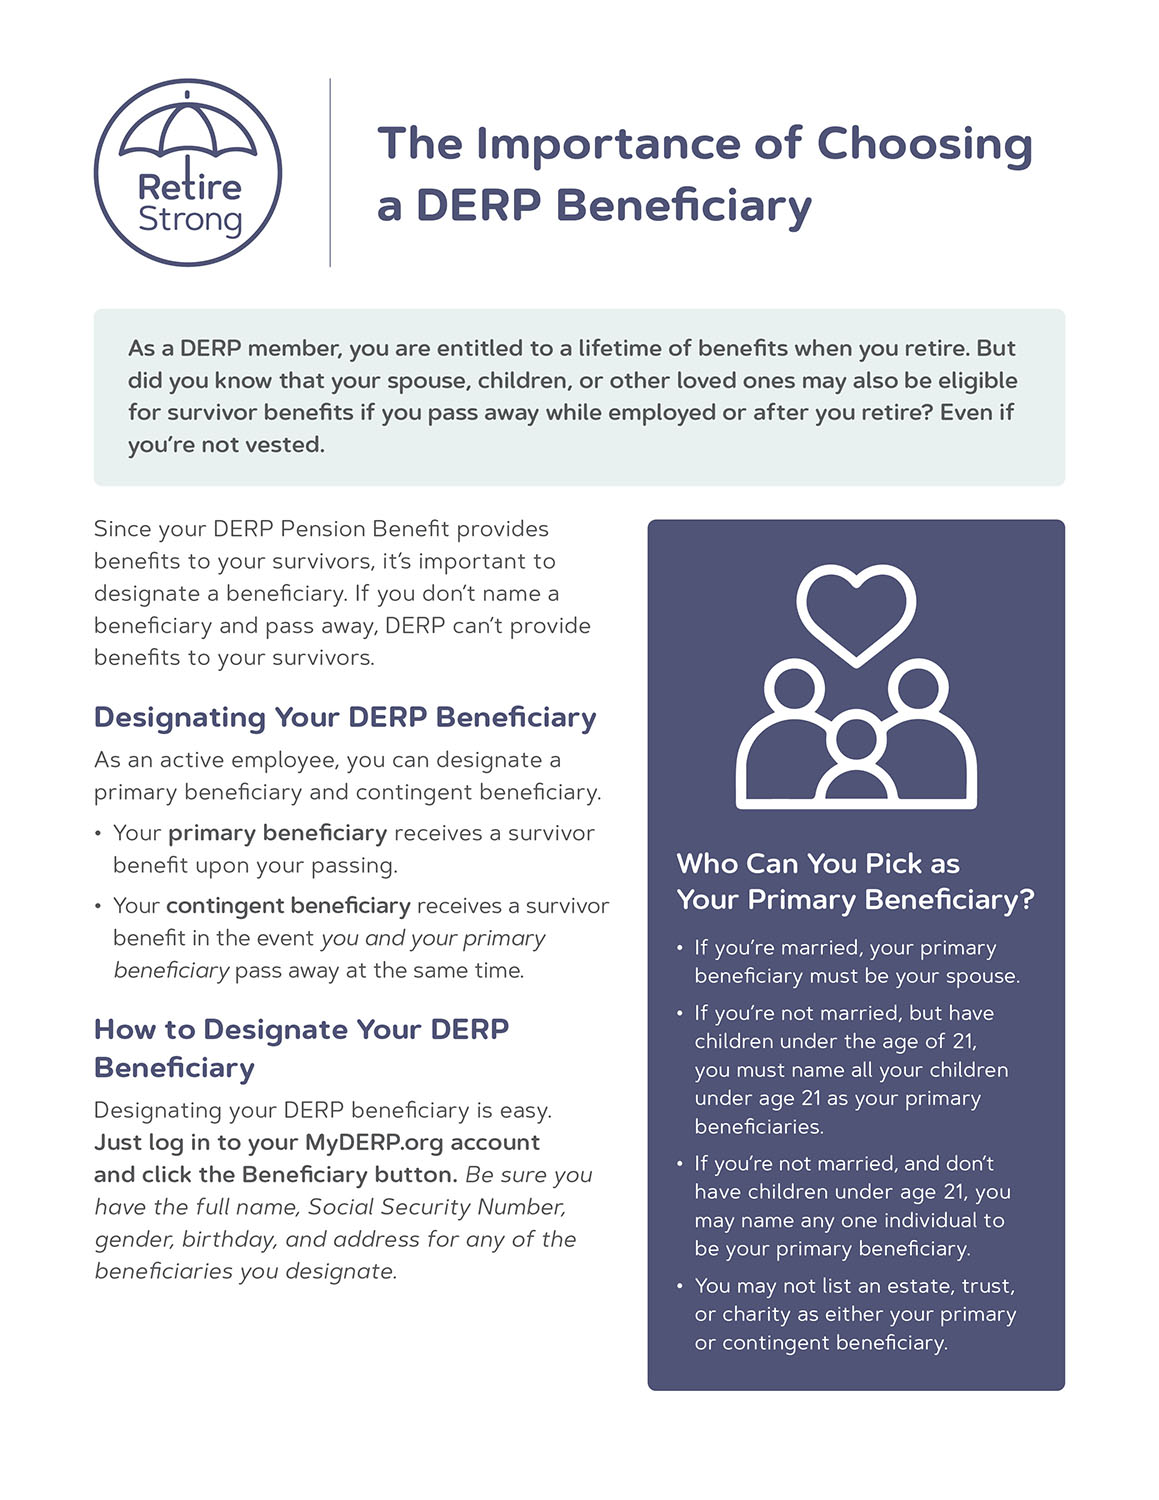 The Importance of Choosing a DERP Beneficiary Flyer